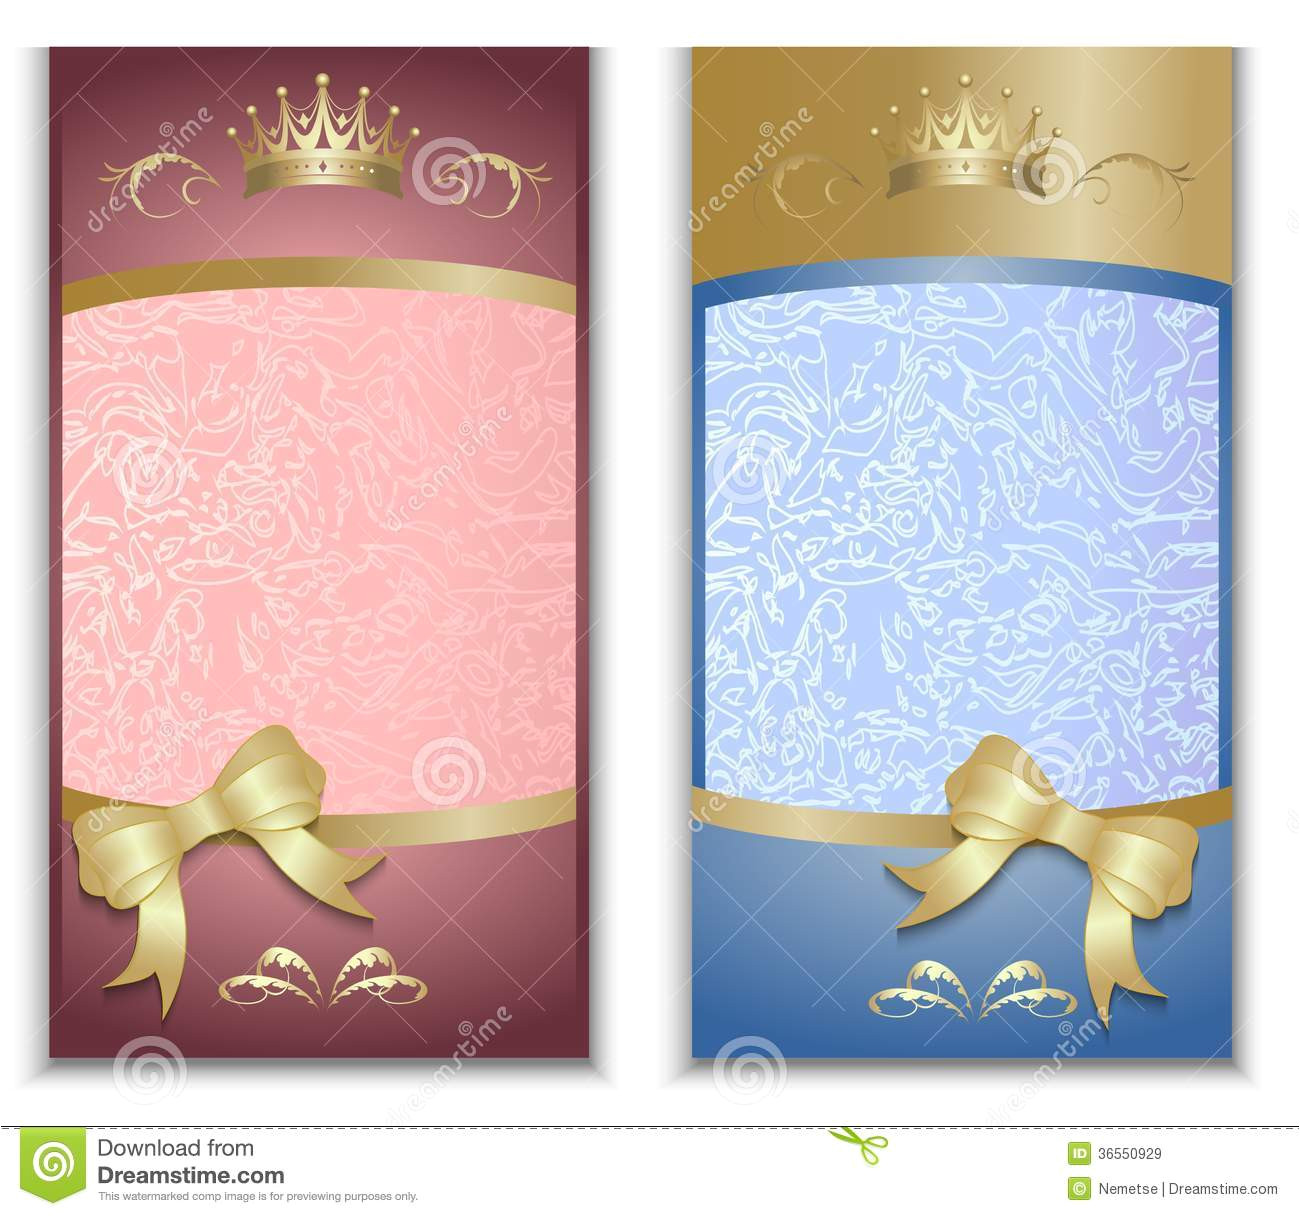 royalty free stock images elegant template luxury invitation greeting card gold bow copy space vector illustration image36550929